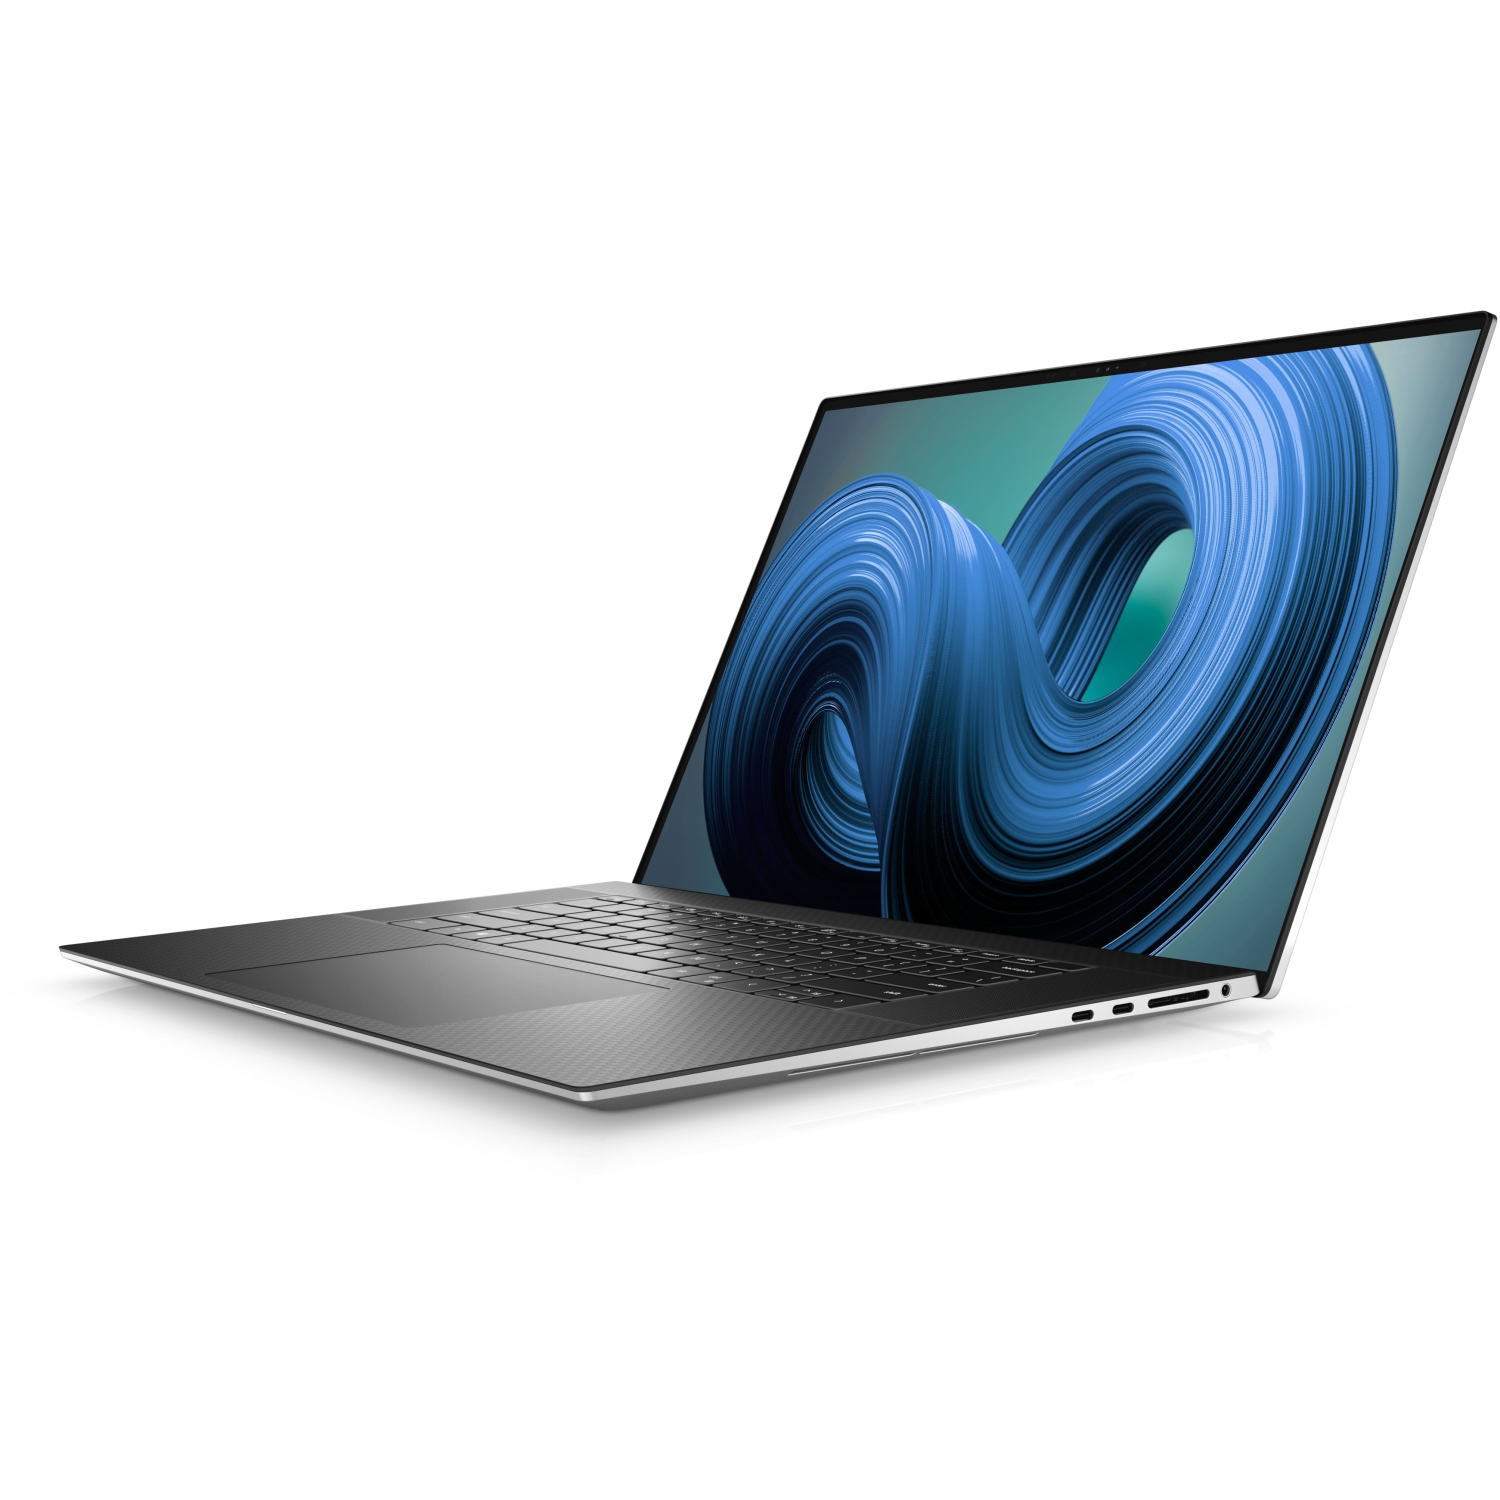 Refurbished (Excellent) – Dell XPS 9720 Laptop (2022) | 17" 4K Touch | Core i7 - 1TB SSD - 32GB RAM - RTX 3050 | 14 Cores @ 4.7 GHz - 12th Gen CPU